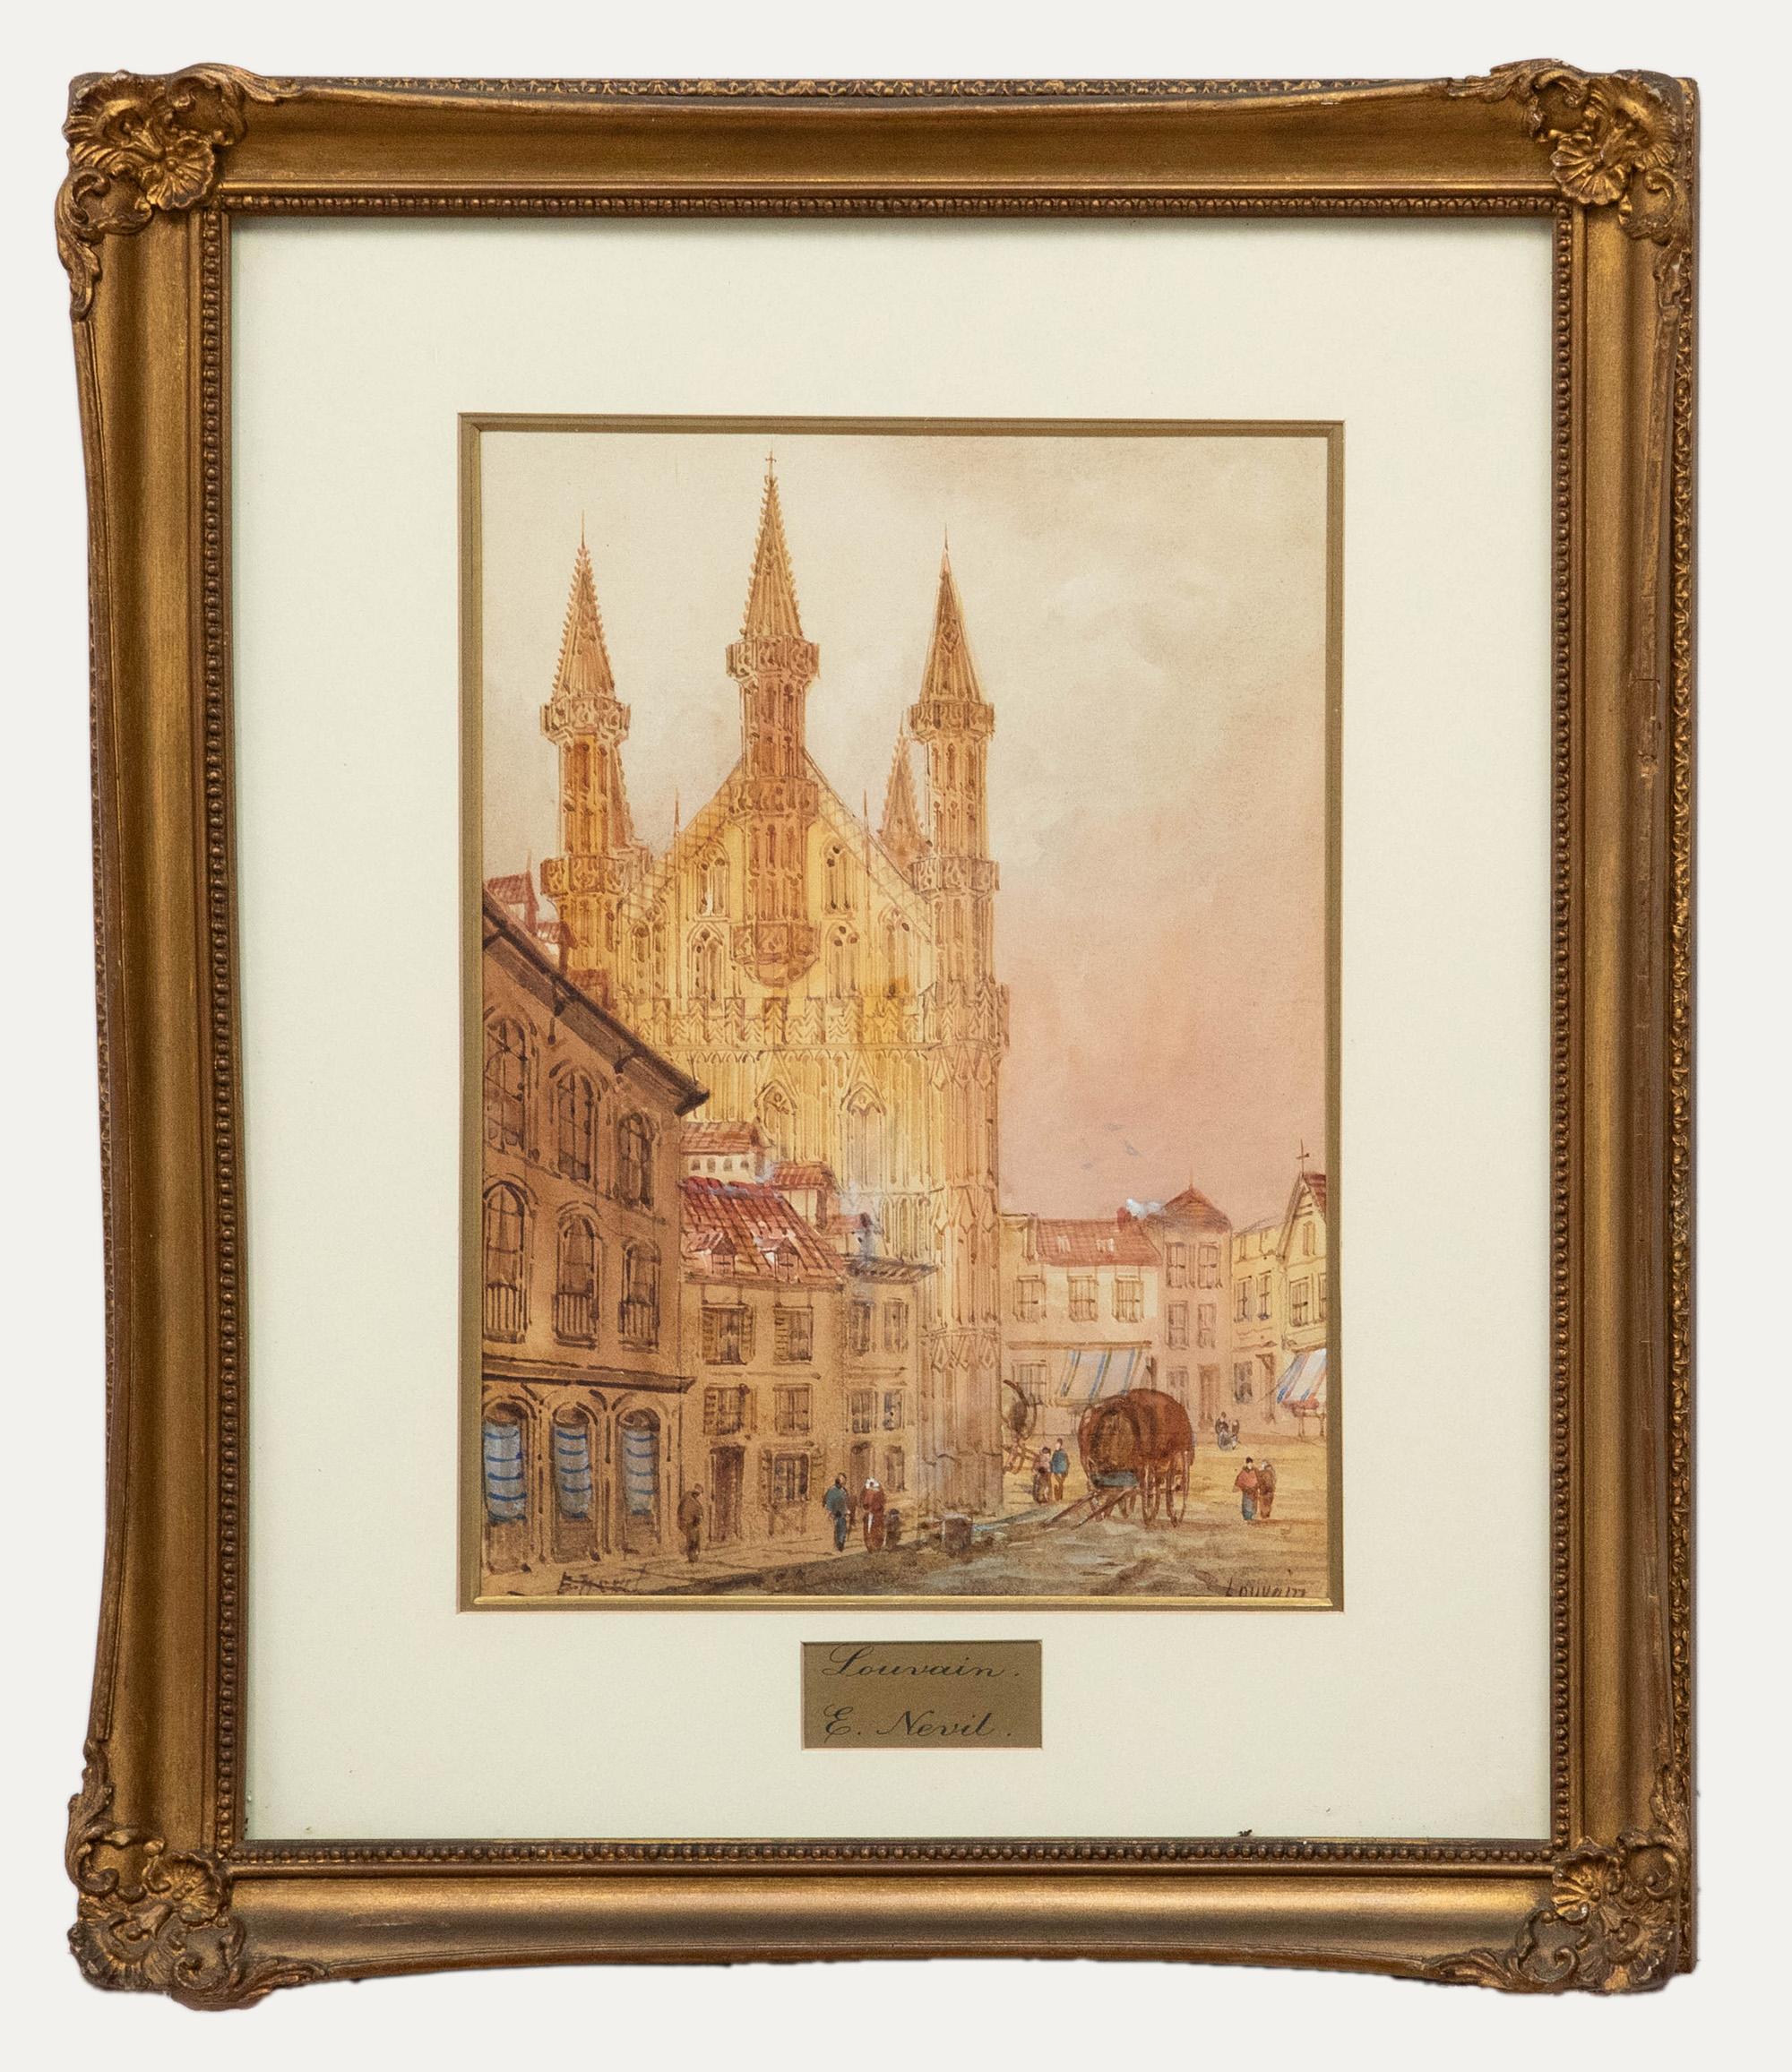 Inscribed with artist name and title. Presented in a gilt frame and double card mount. On paper.
